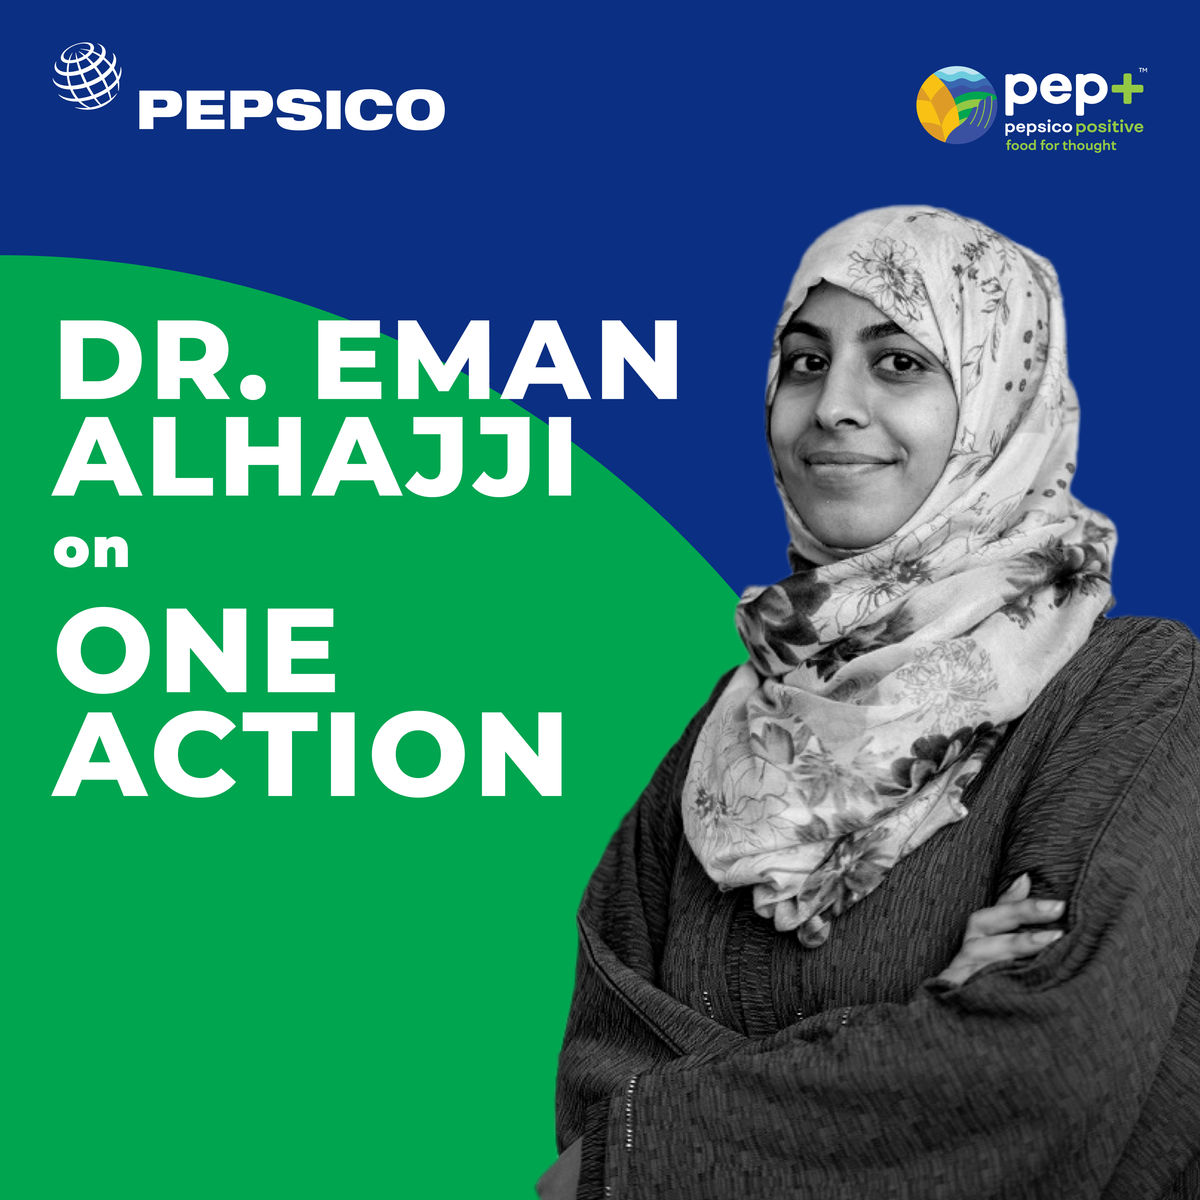 Creating momentum of good change among the youth, with Dr. Eman Alhajji